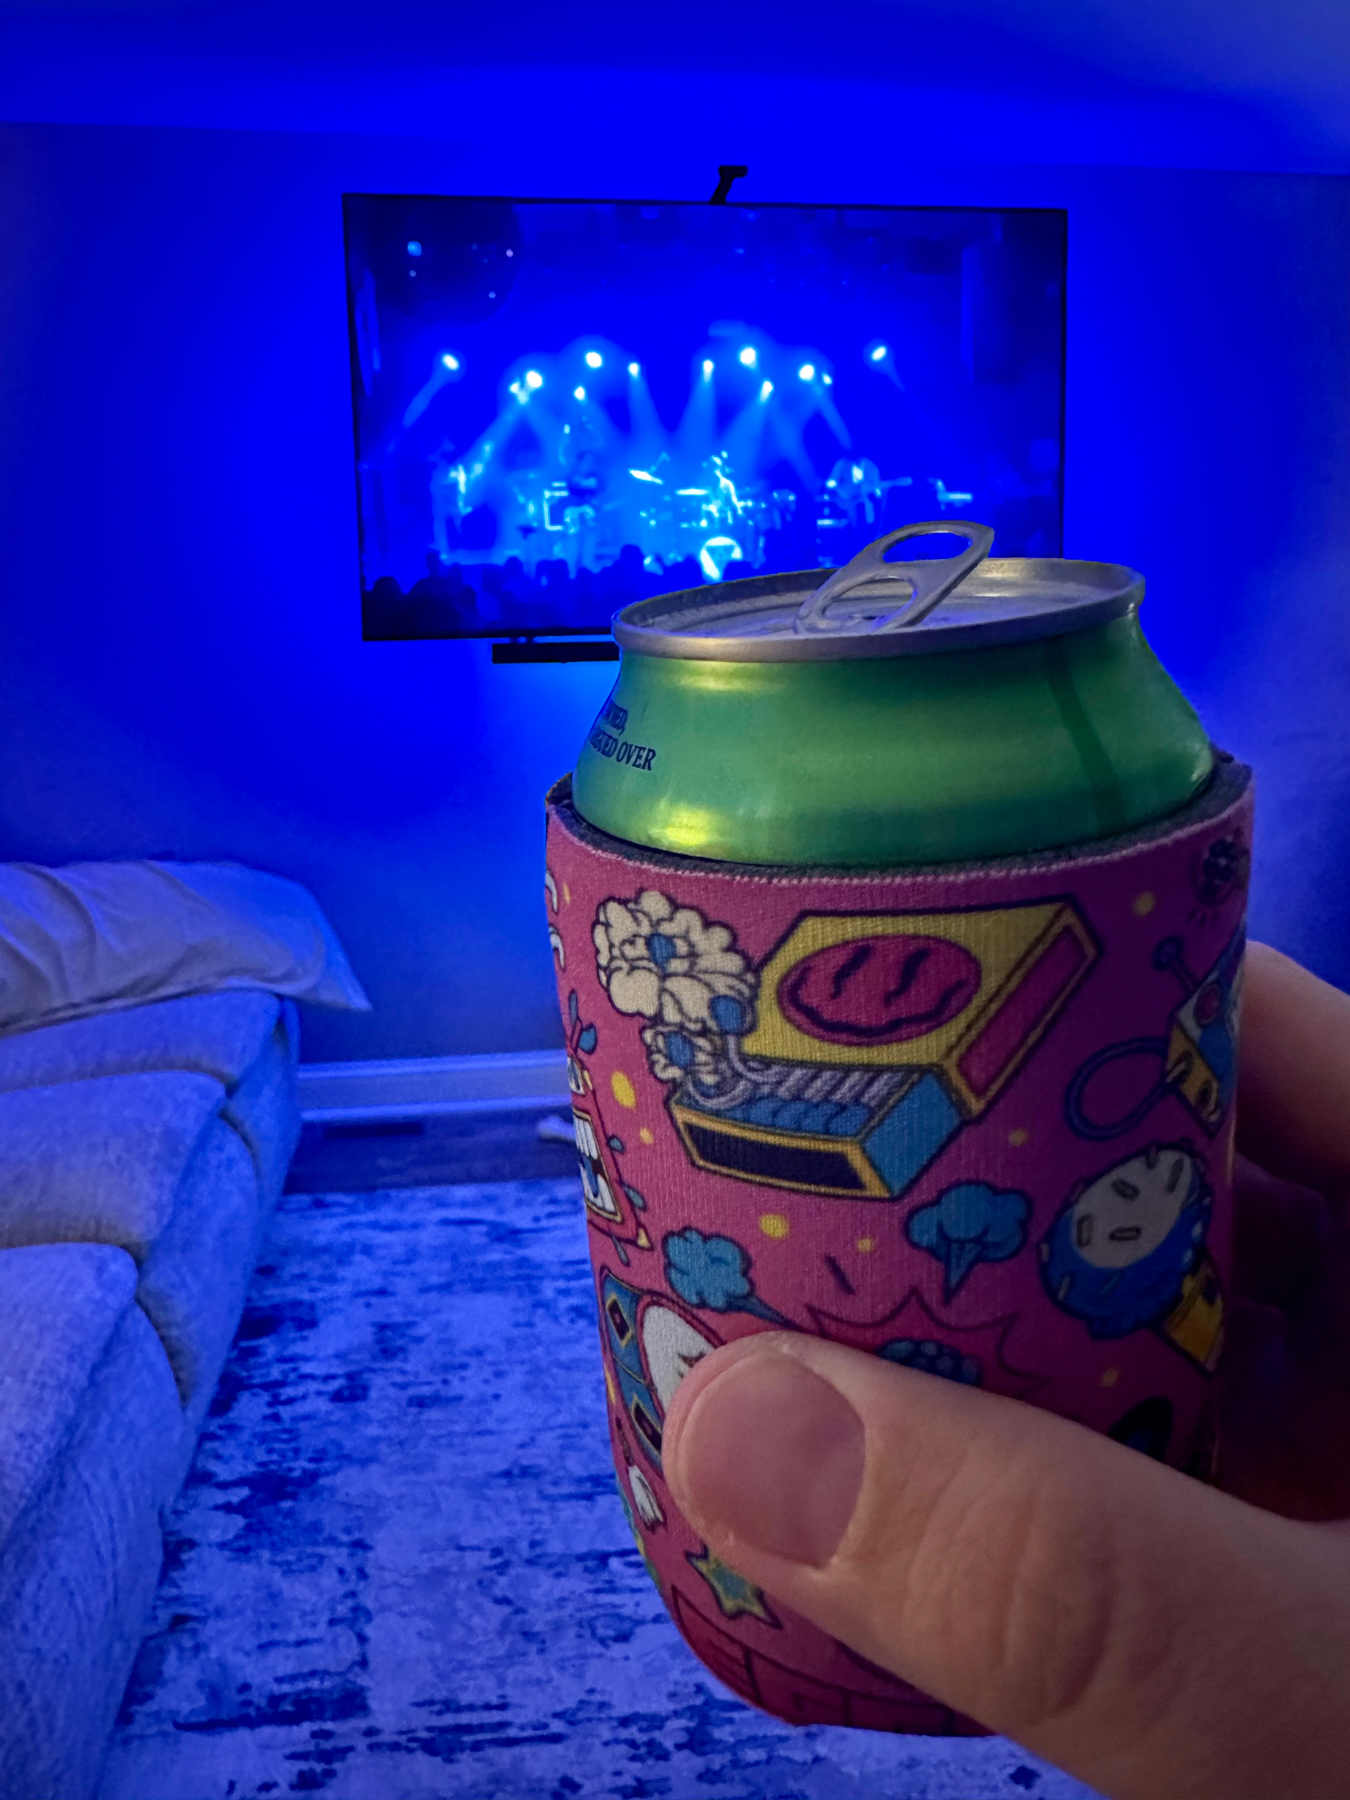 A hand holding a green can with a colorful cozy, in front of a TV displaying a live concert, with LED blue lights illuminating the room.